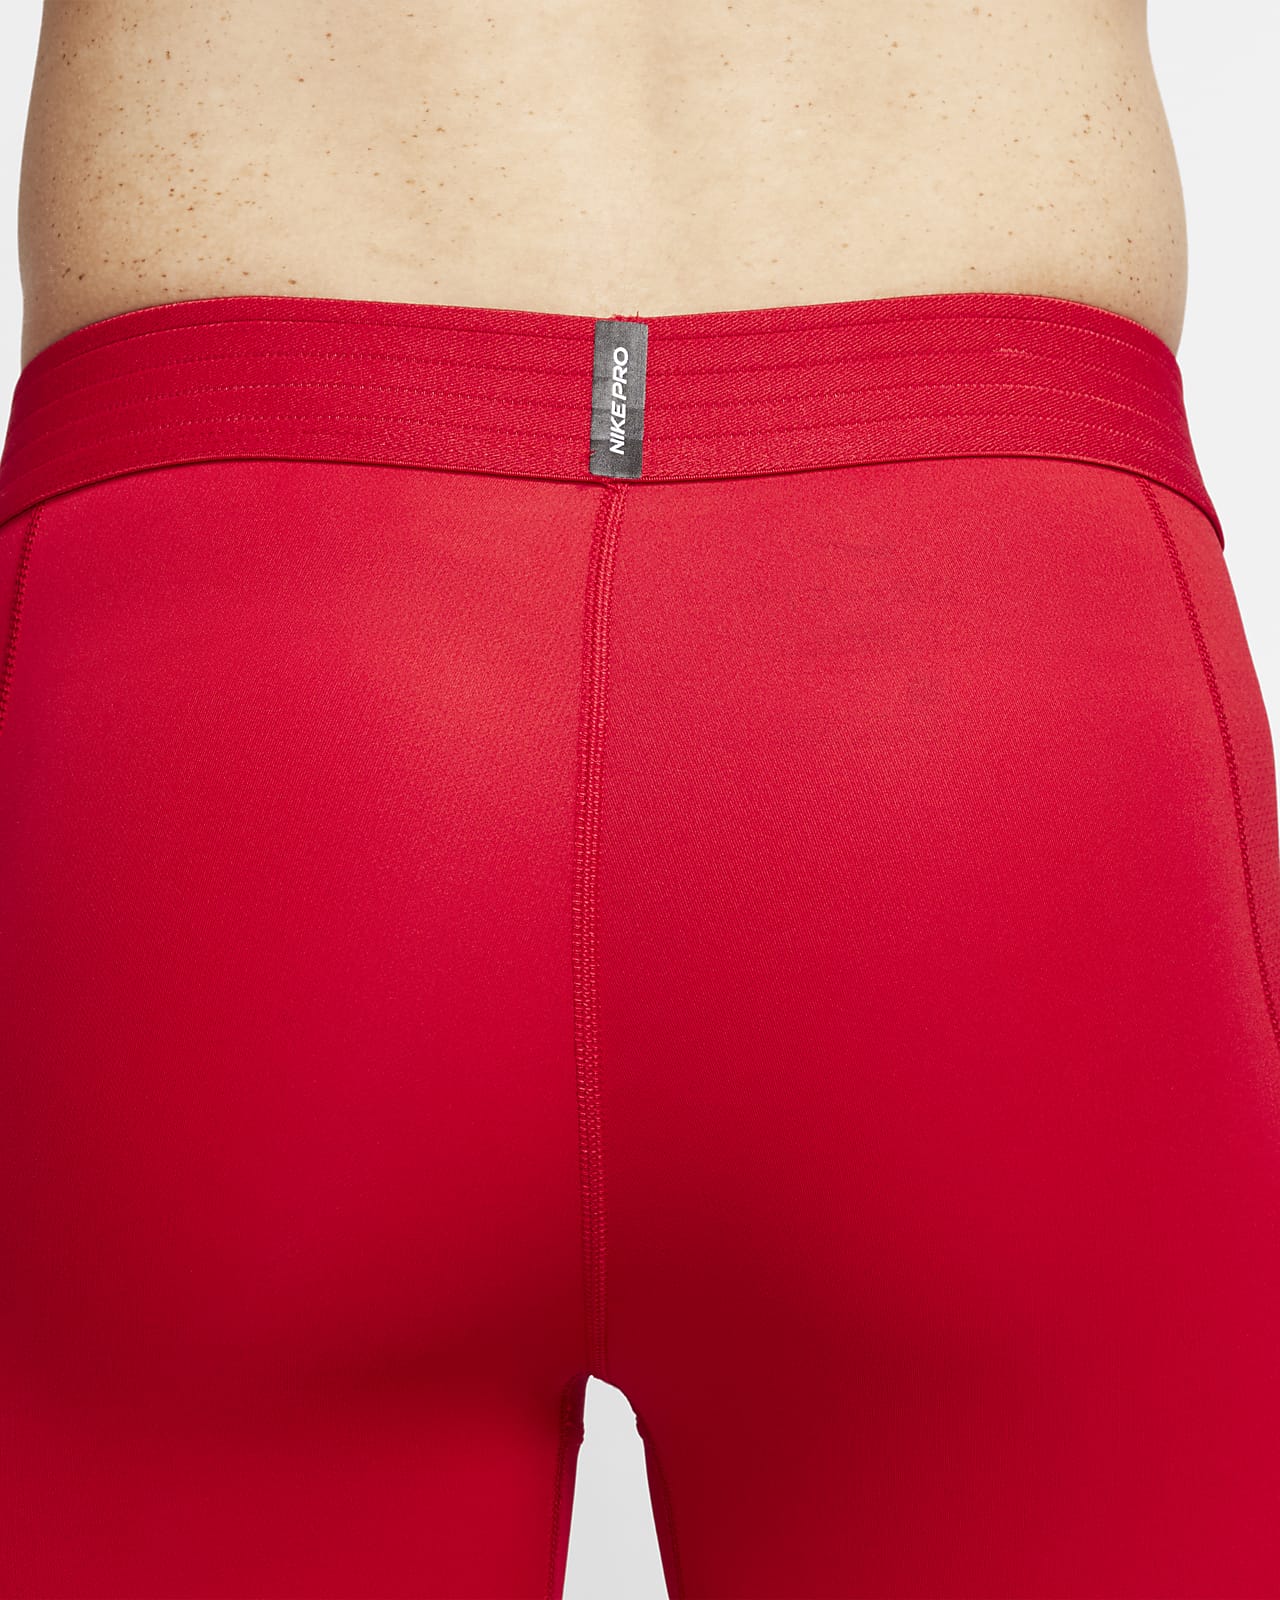 nike pro red spandex